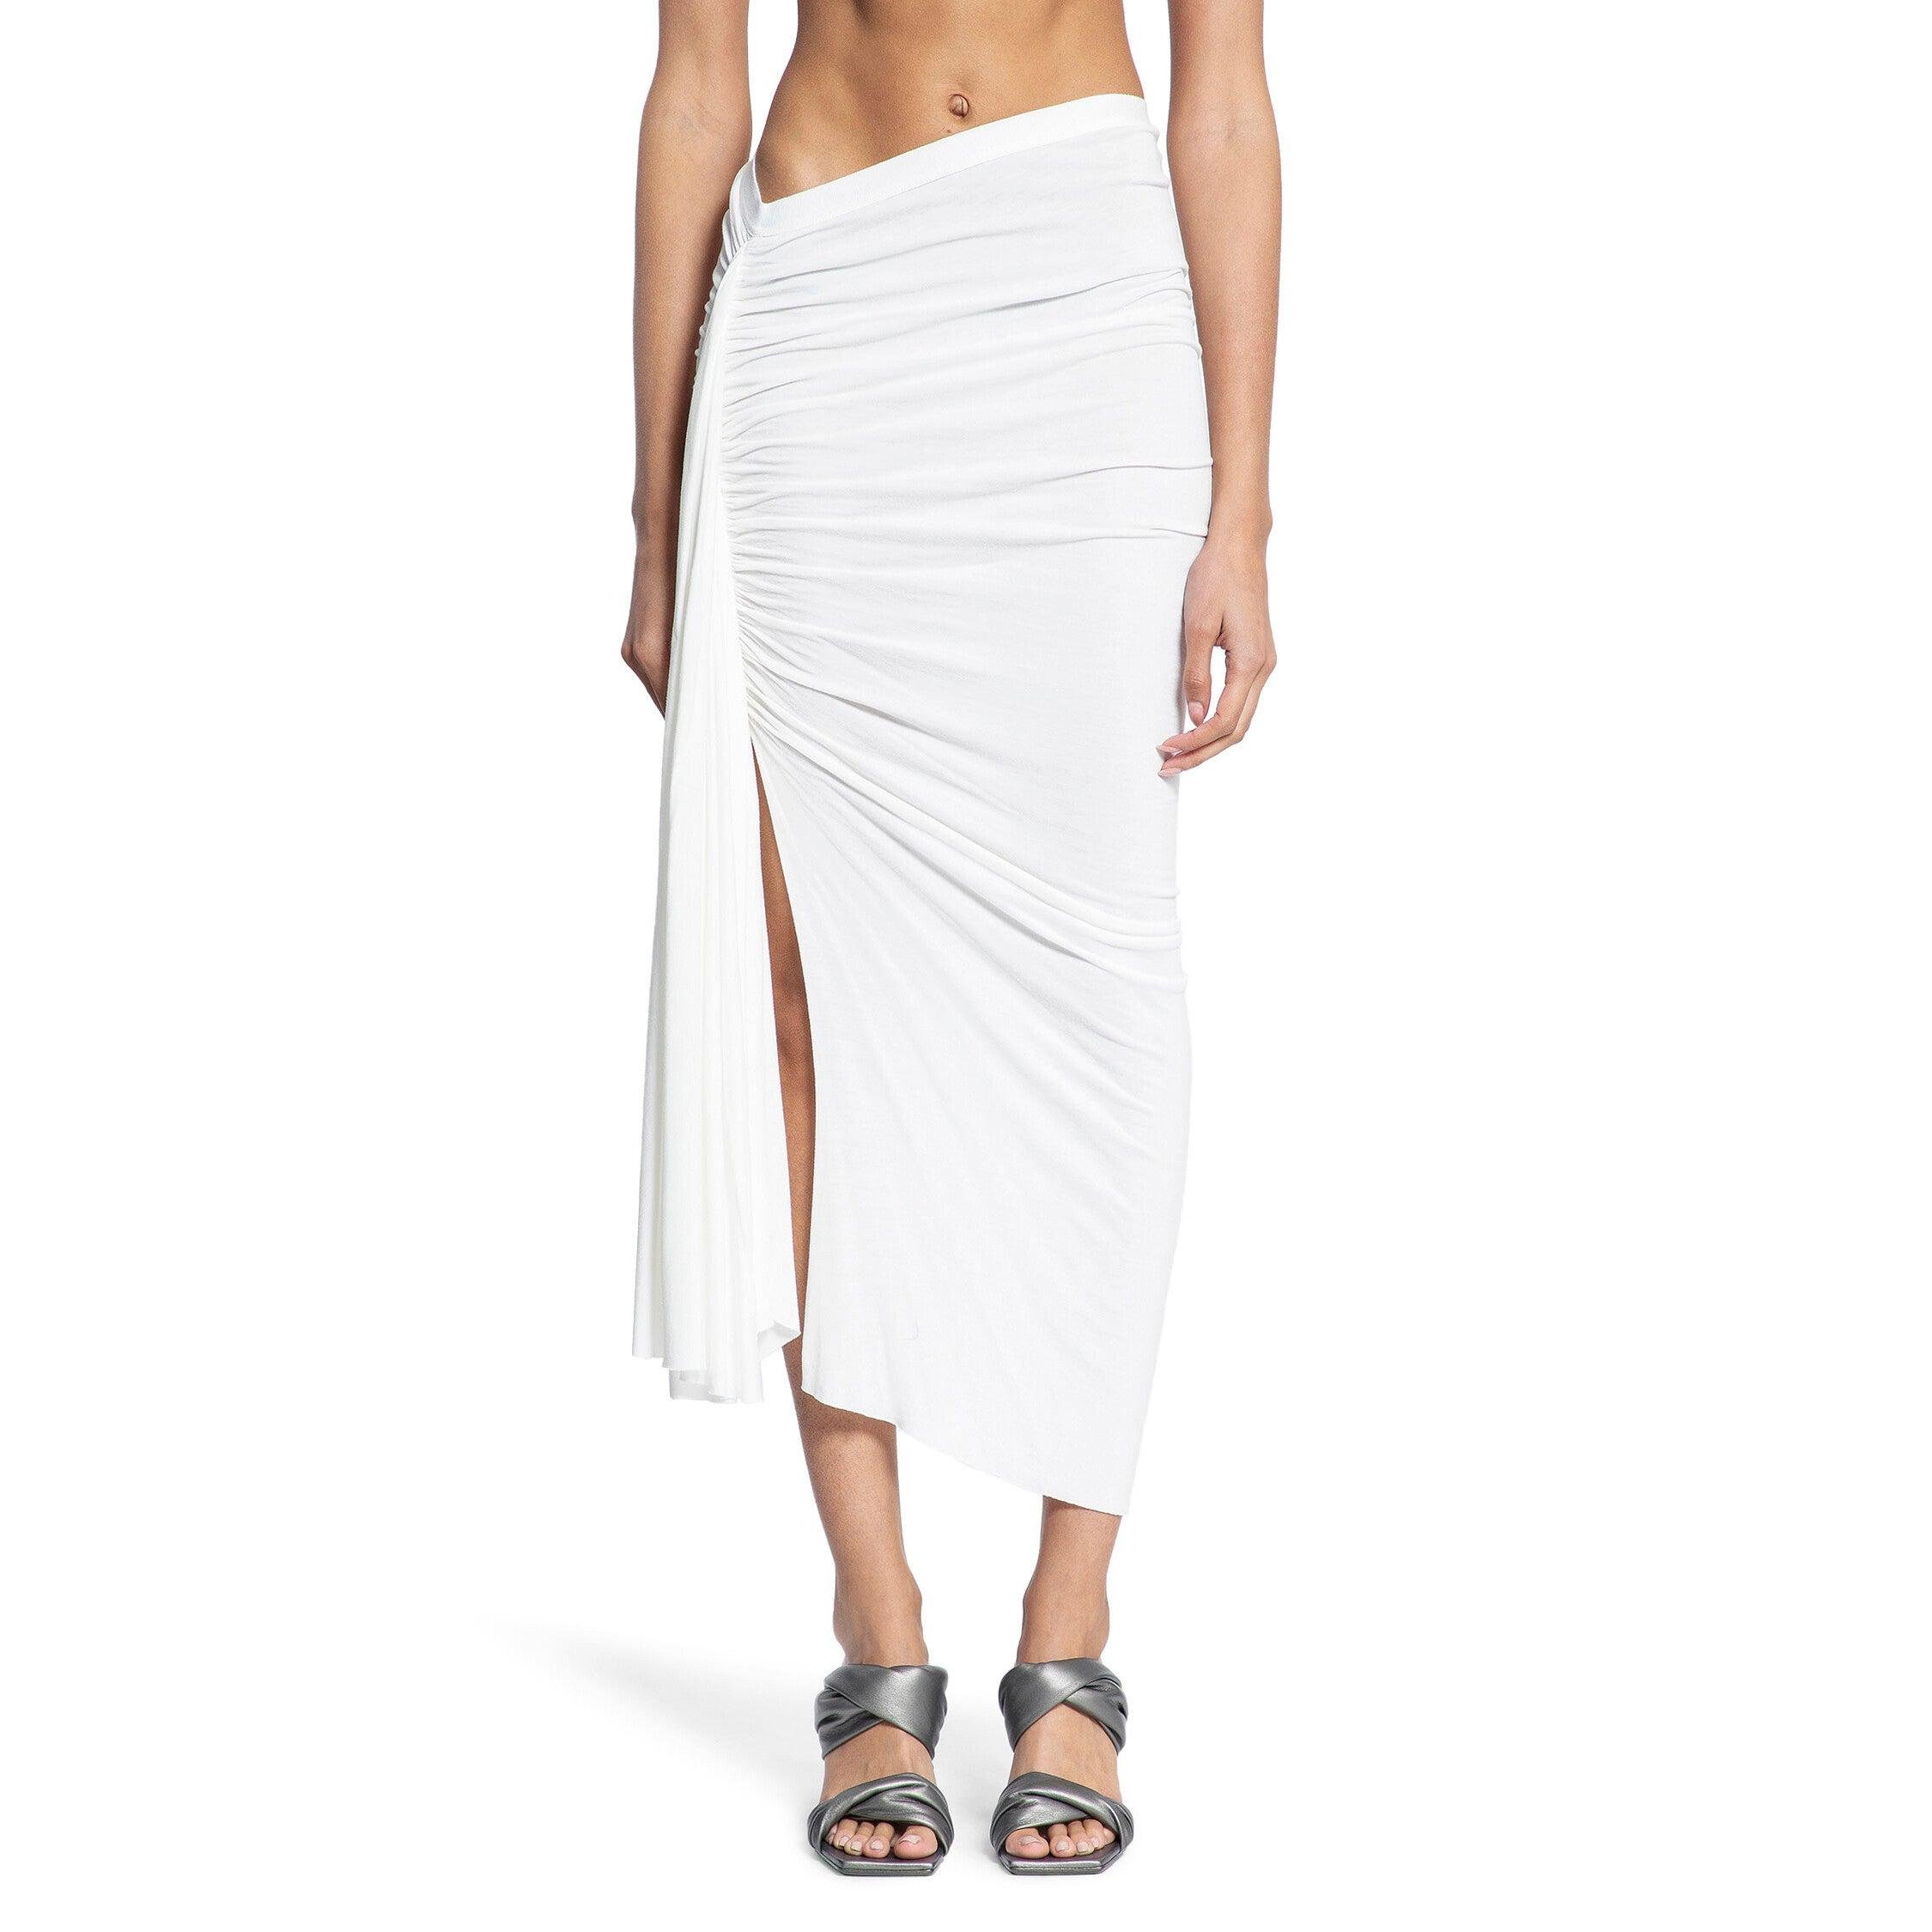 RICK OWENS WOMAN WHITE SKIRTS by RICK OWENS